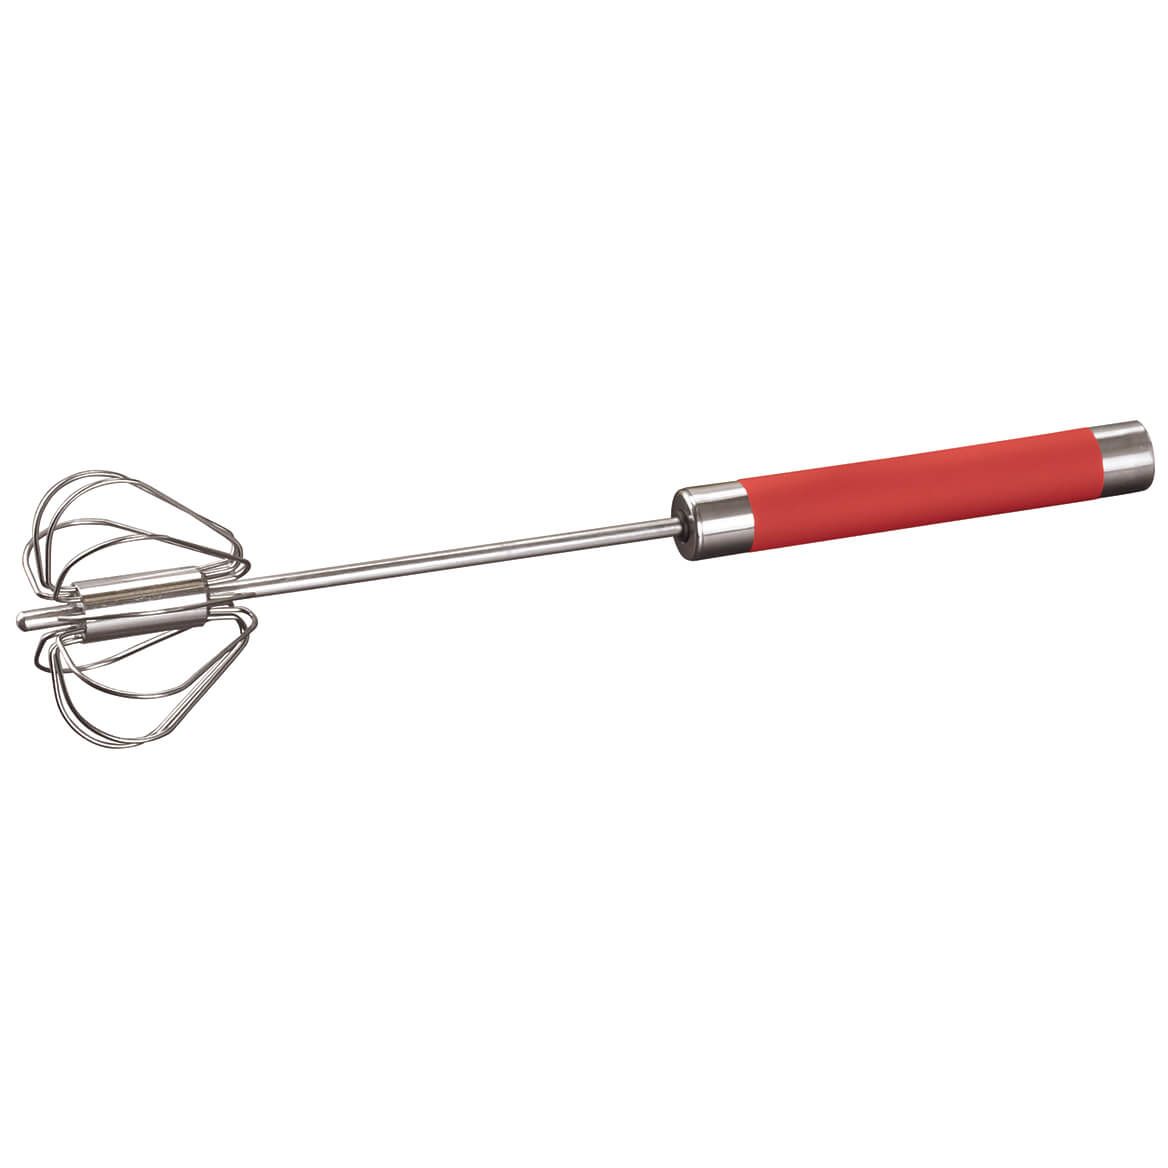 Push-Down Whisk + '-' + 375342